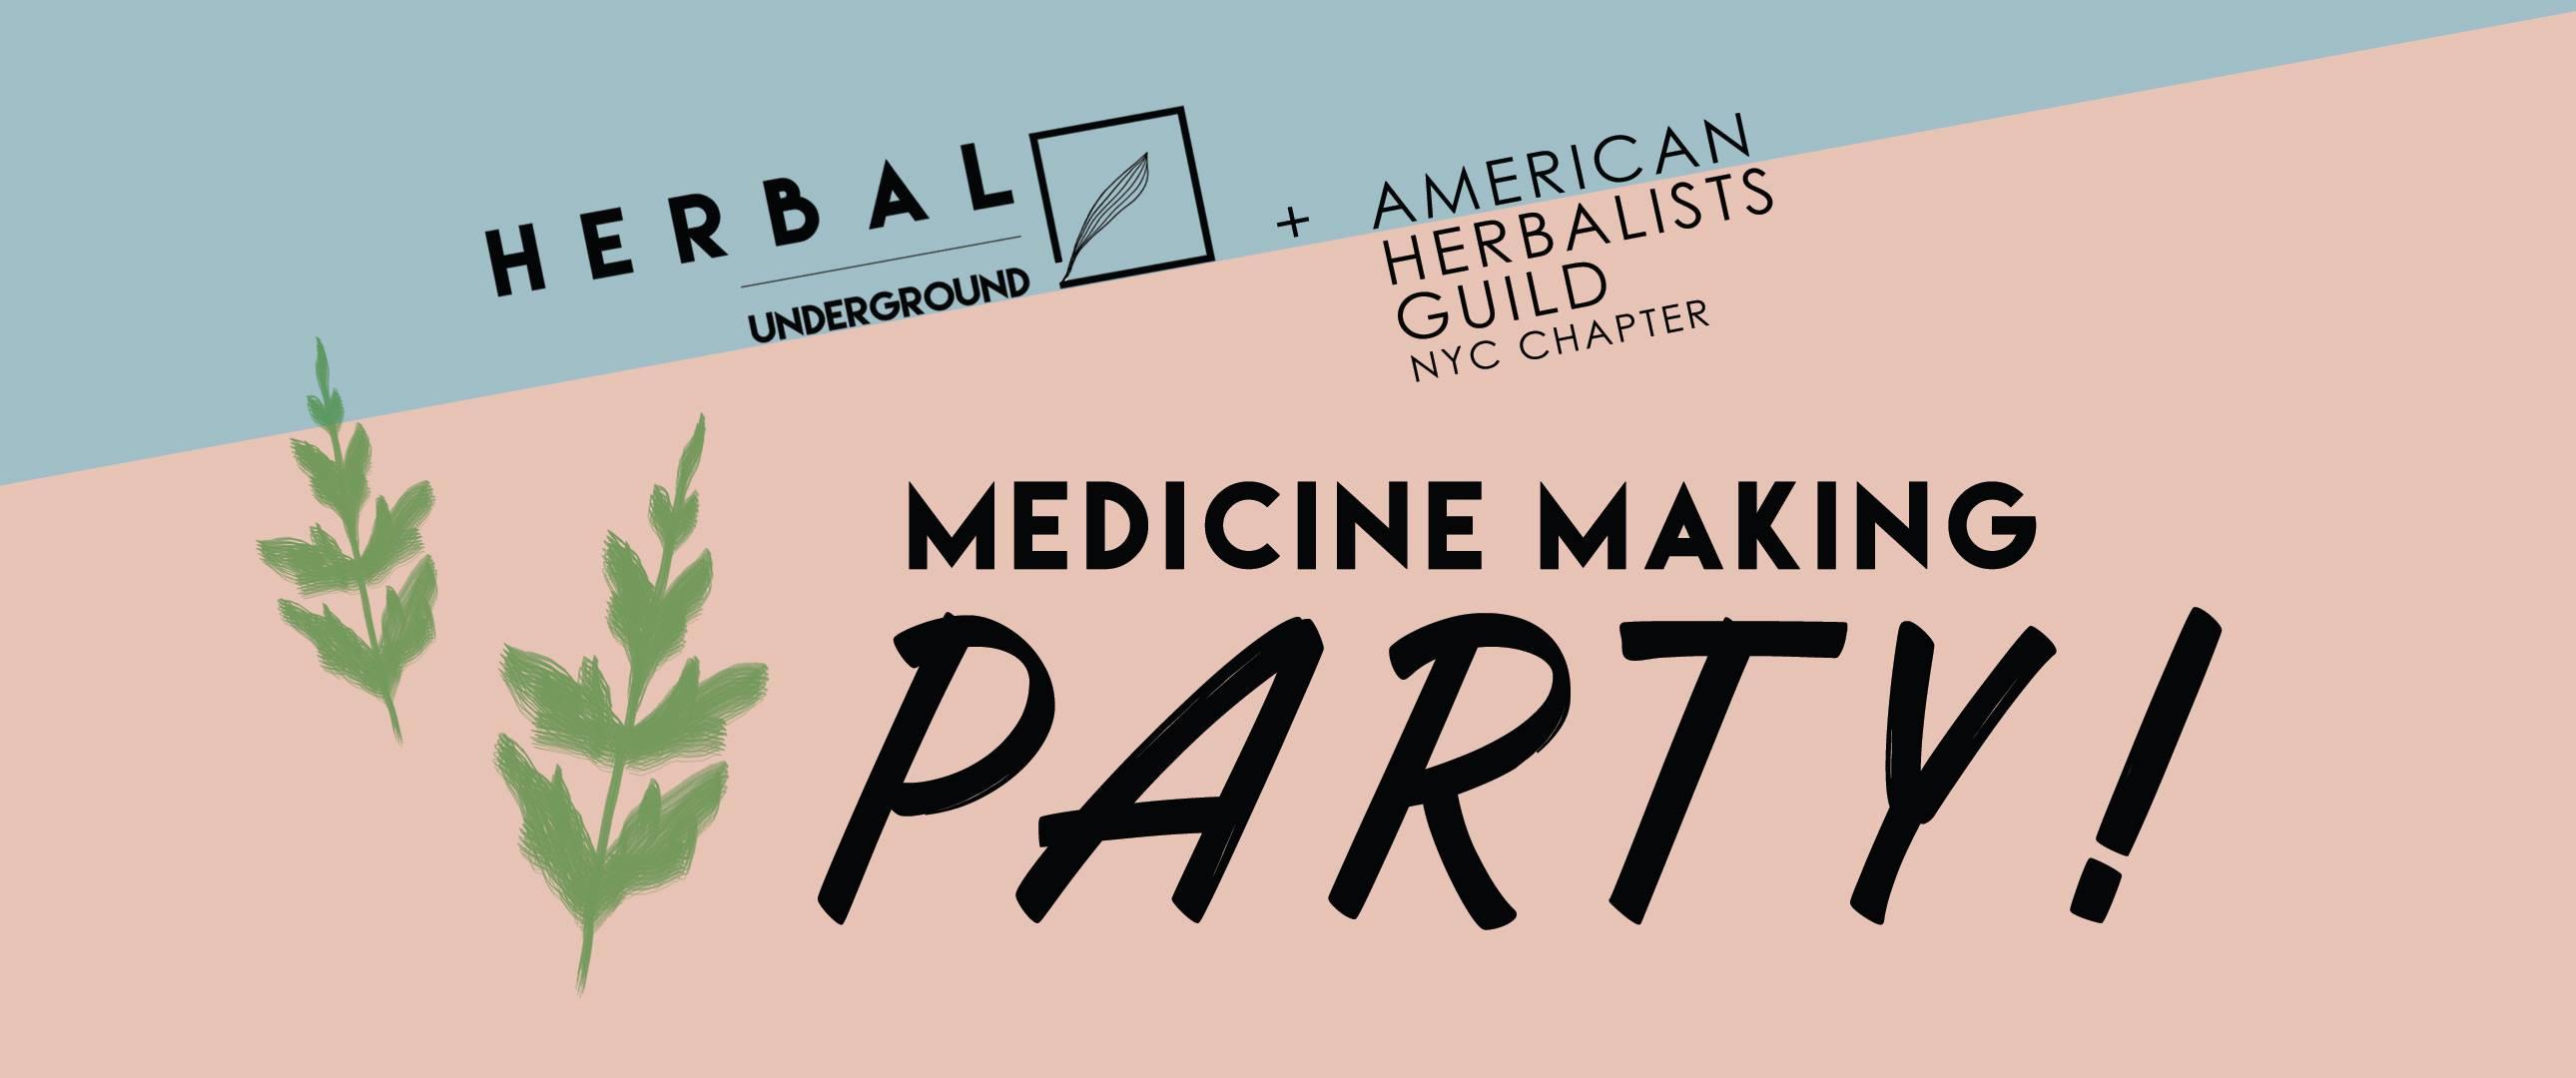 Herbal Underground + AHG NYC Chapter Medicine Making Party